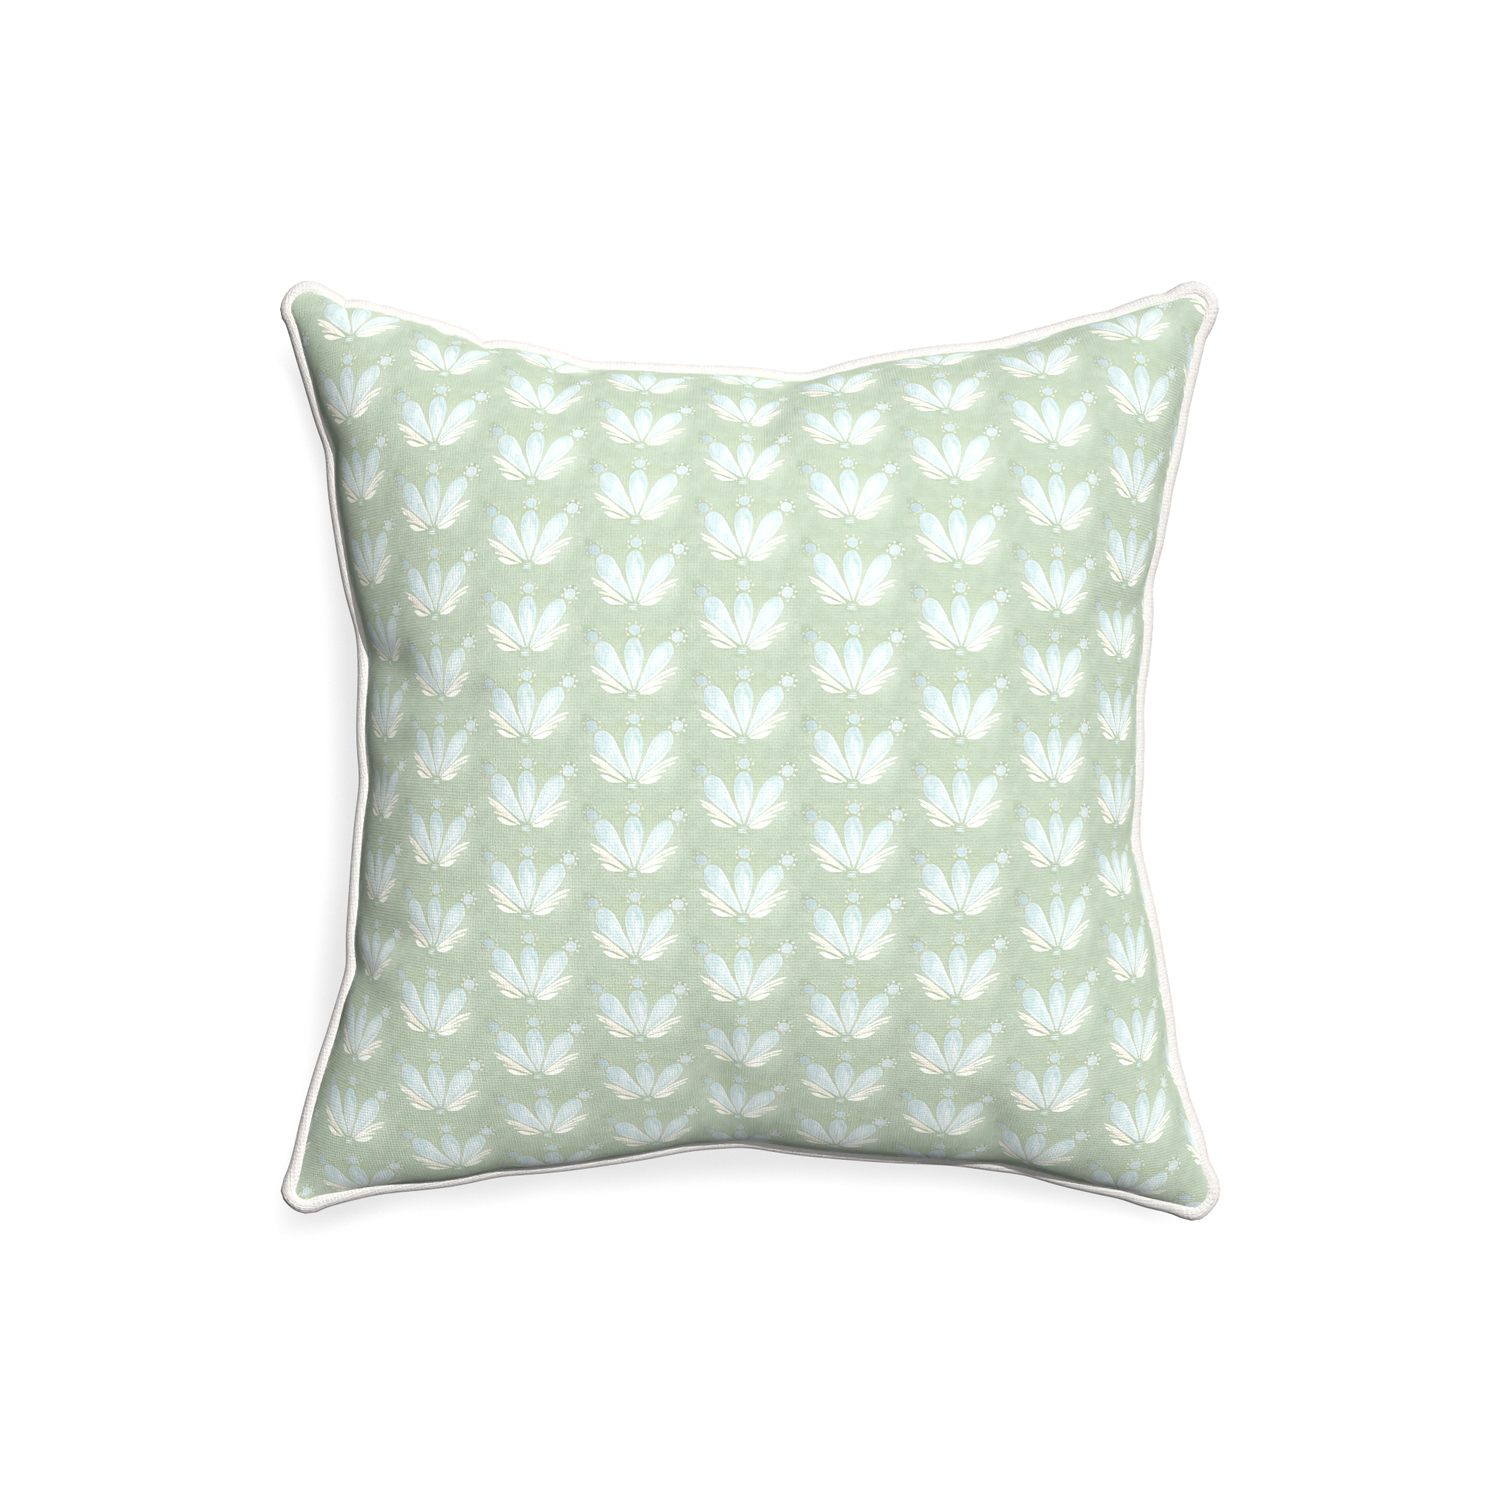 20-square serena sea salt custom pillow with snow piping on white background